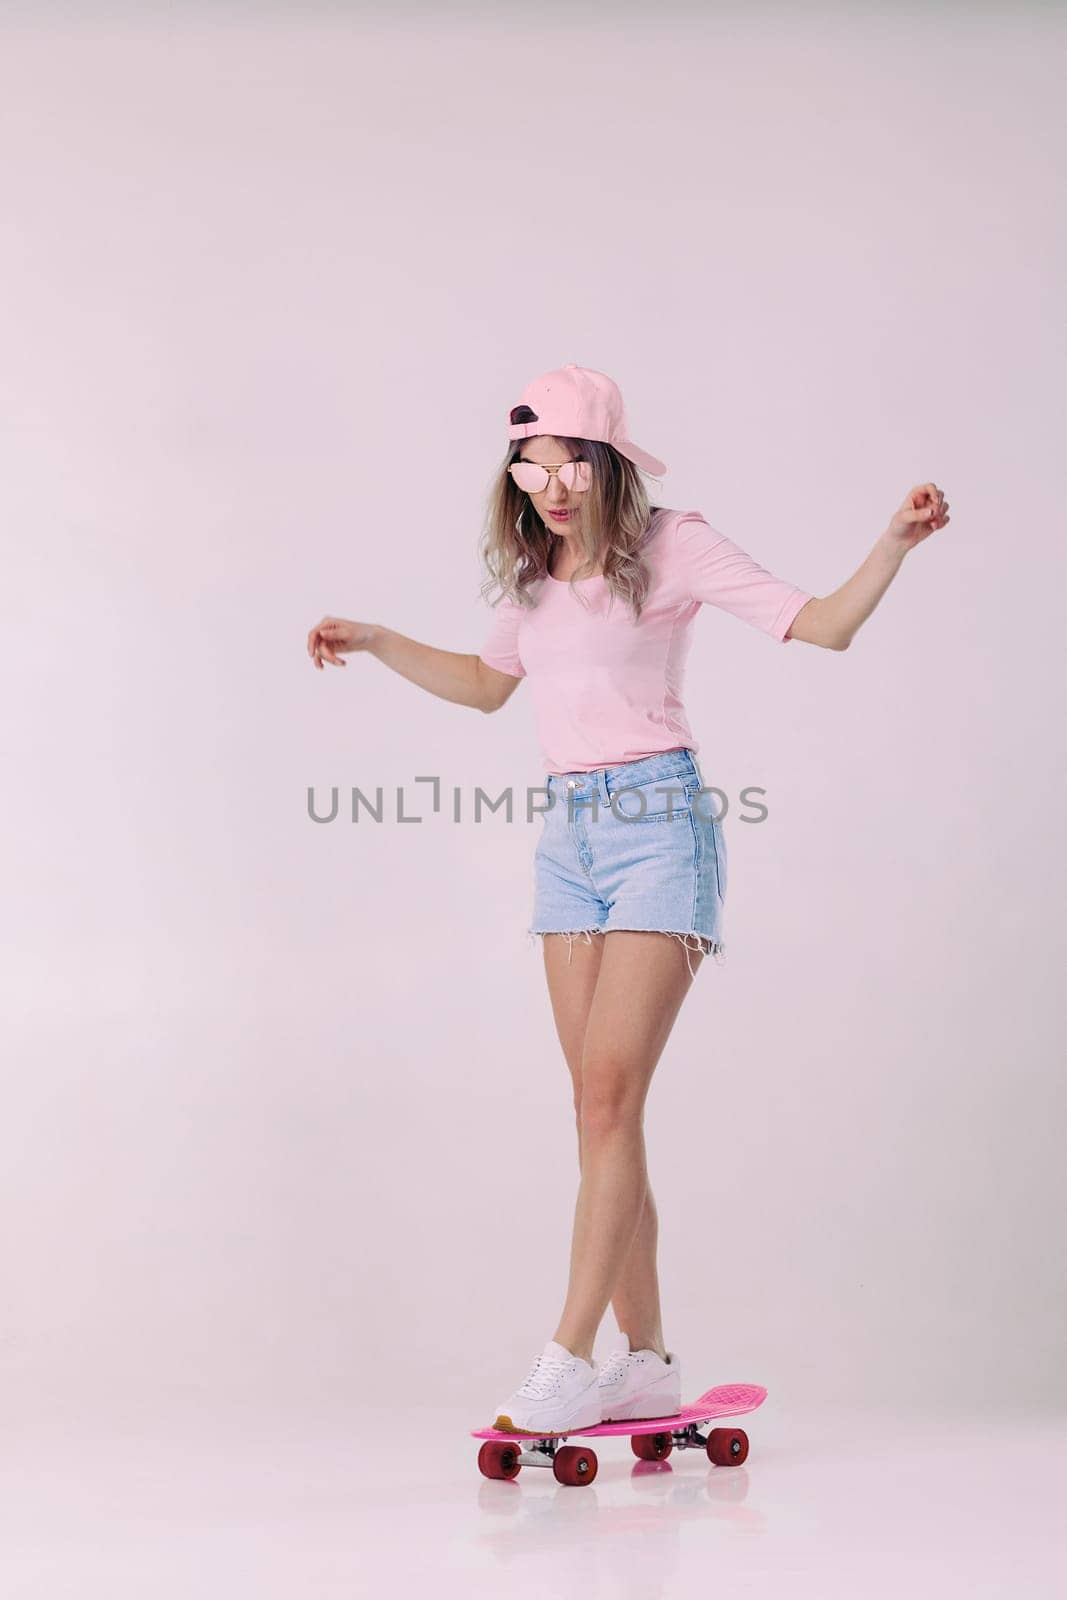 beautiful woman in sunglasses, pink t-shirt and cap stands on pink skateboard